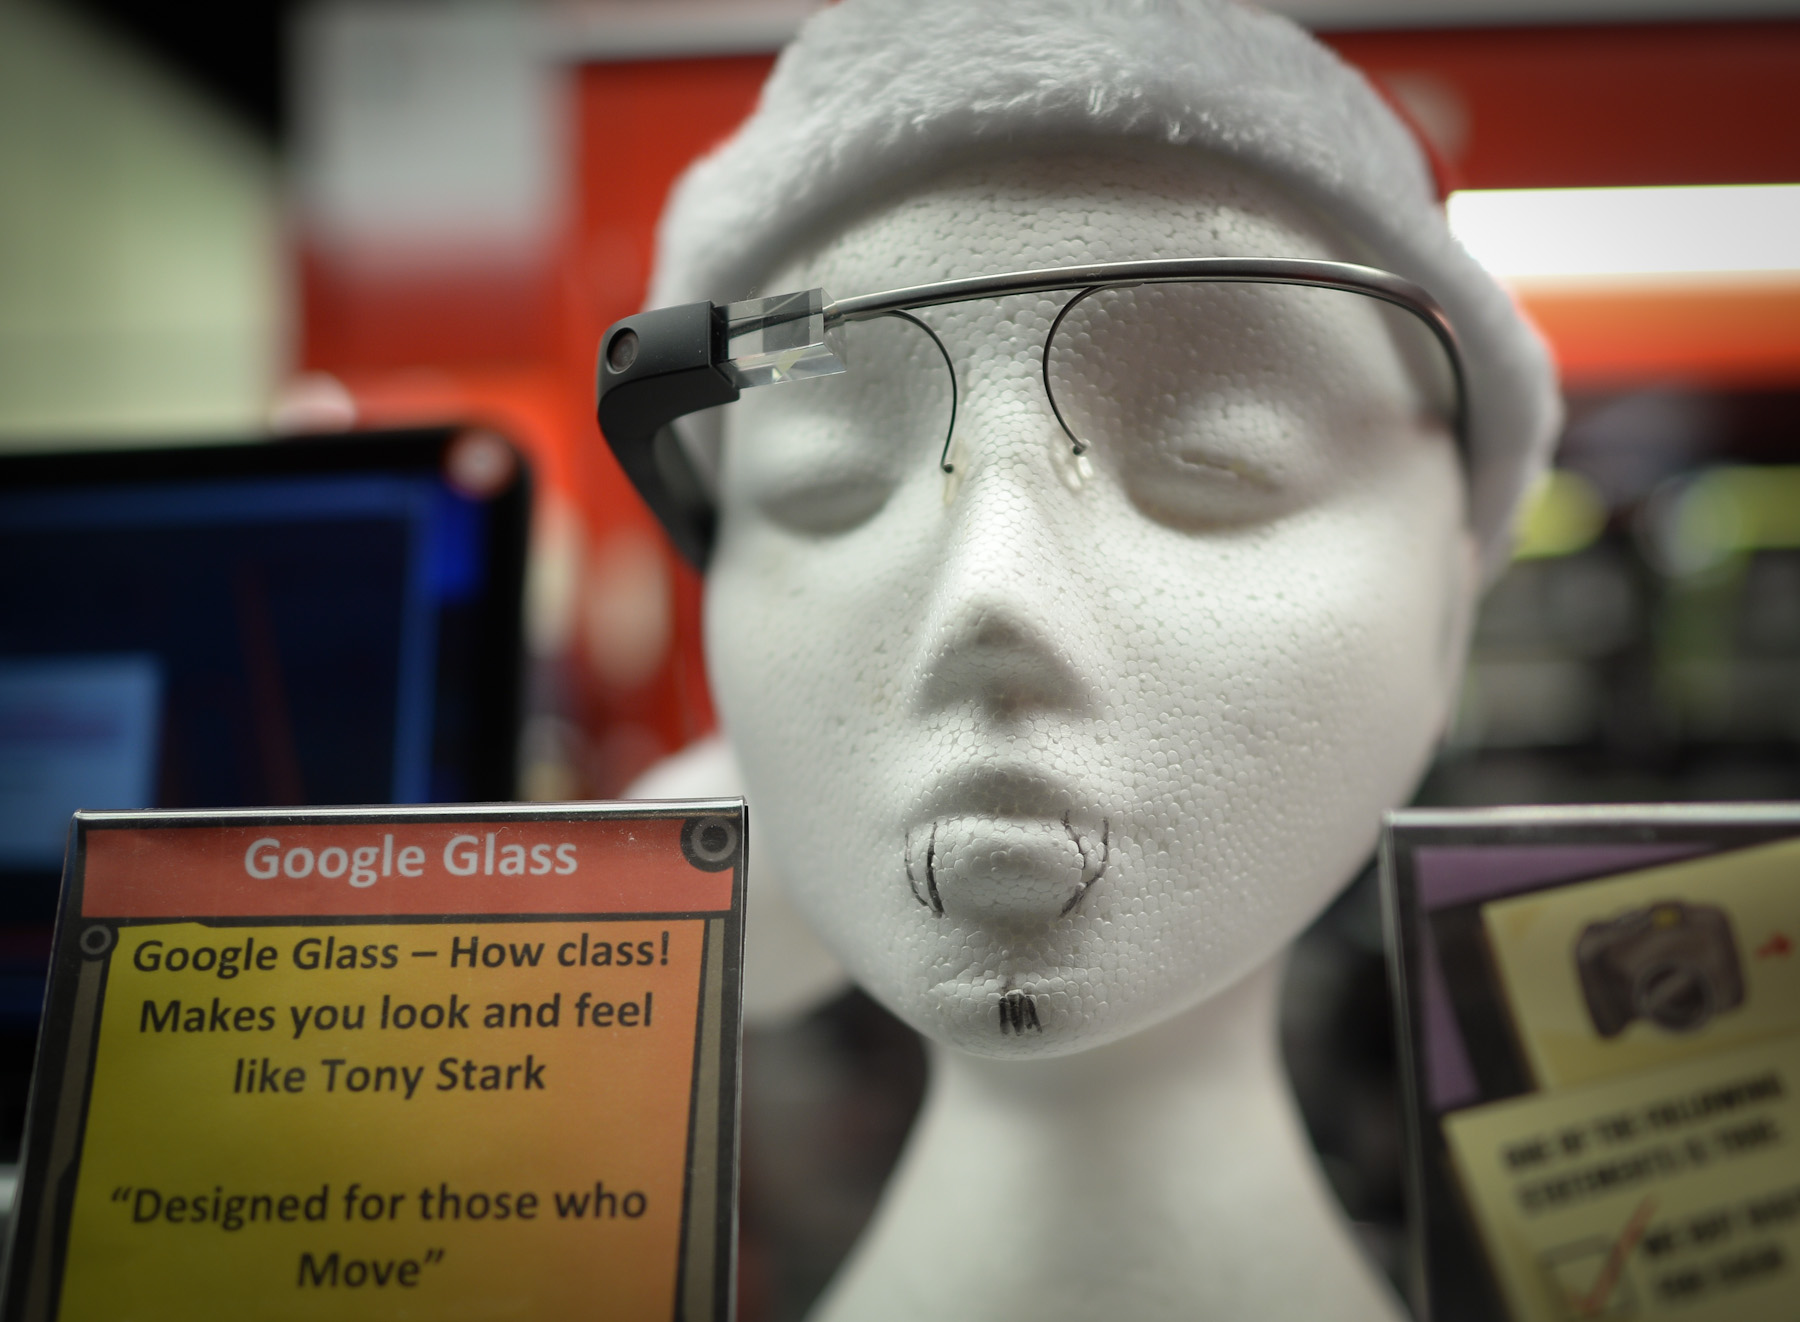 Return of the ‘Glasshole’: What to Know About Apple and Google’s Augmented Reality Headsets